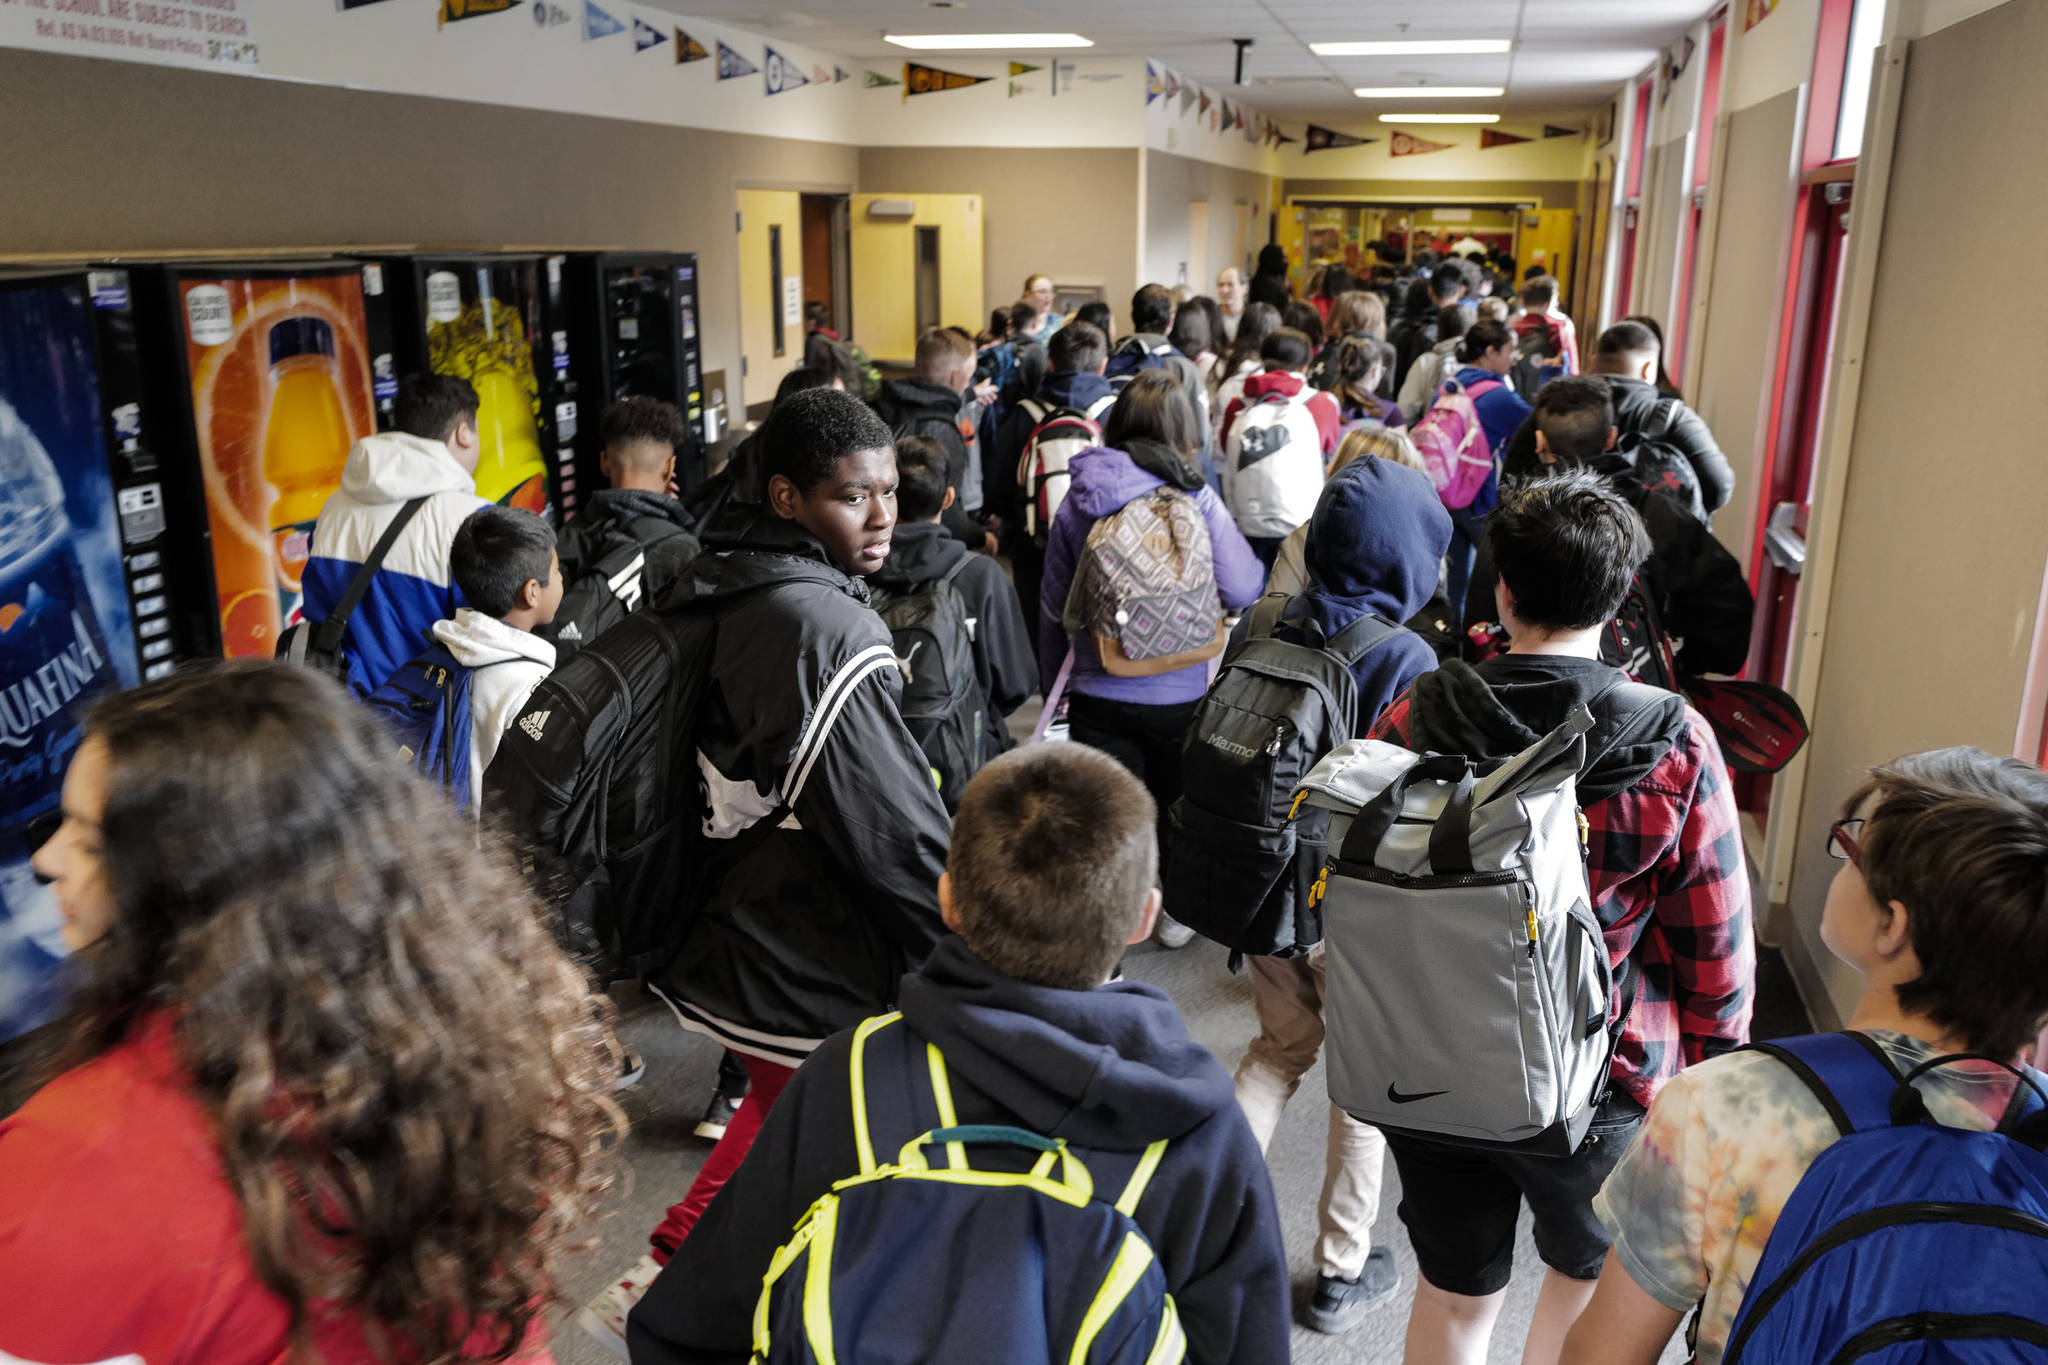 Students head for their classrooms on the first day of school at Floyd Dryden Middle School on Monday, Aug. 19, 2019. (Michael Penn | Juneau Empire)